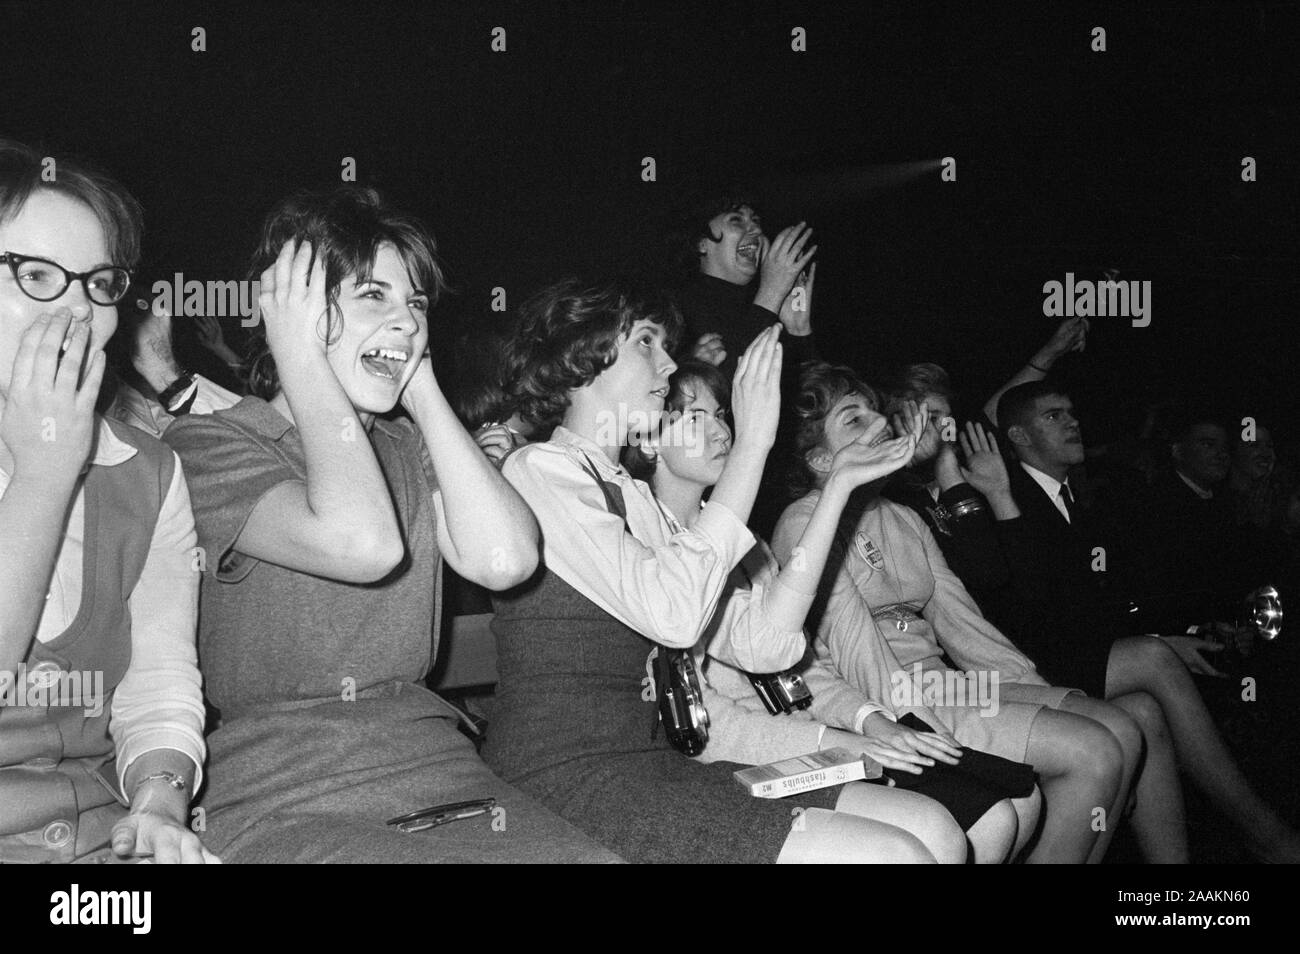 Excited Fans Reacting to The Beatles British Rock and Roll Performing, Washington Coliseum, Washington, D.C., USA, photograph by Marion S. Trikosko, February 11, 1964 Stock Photo